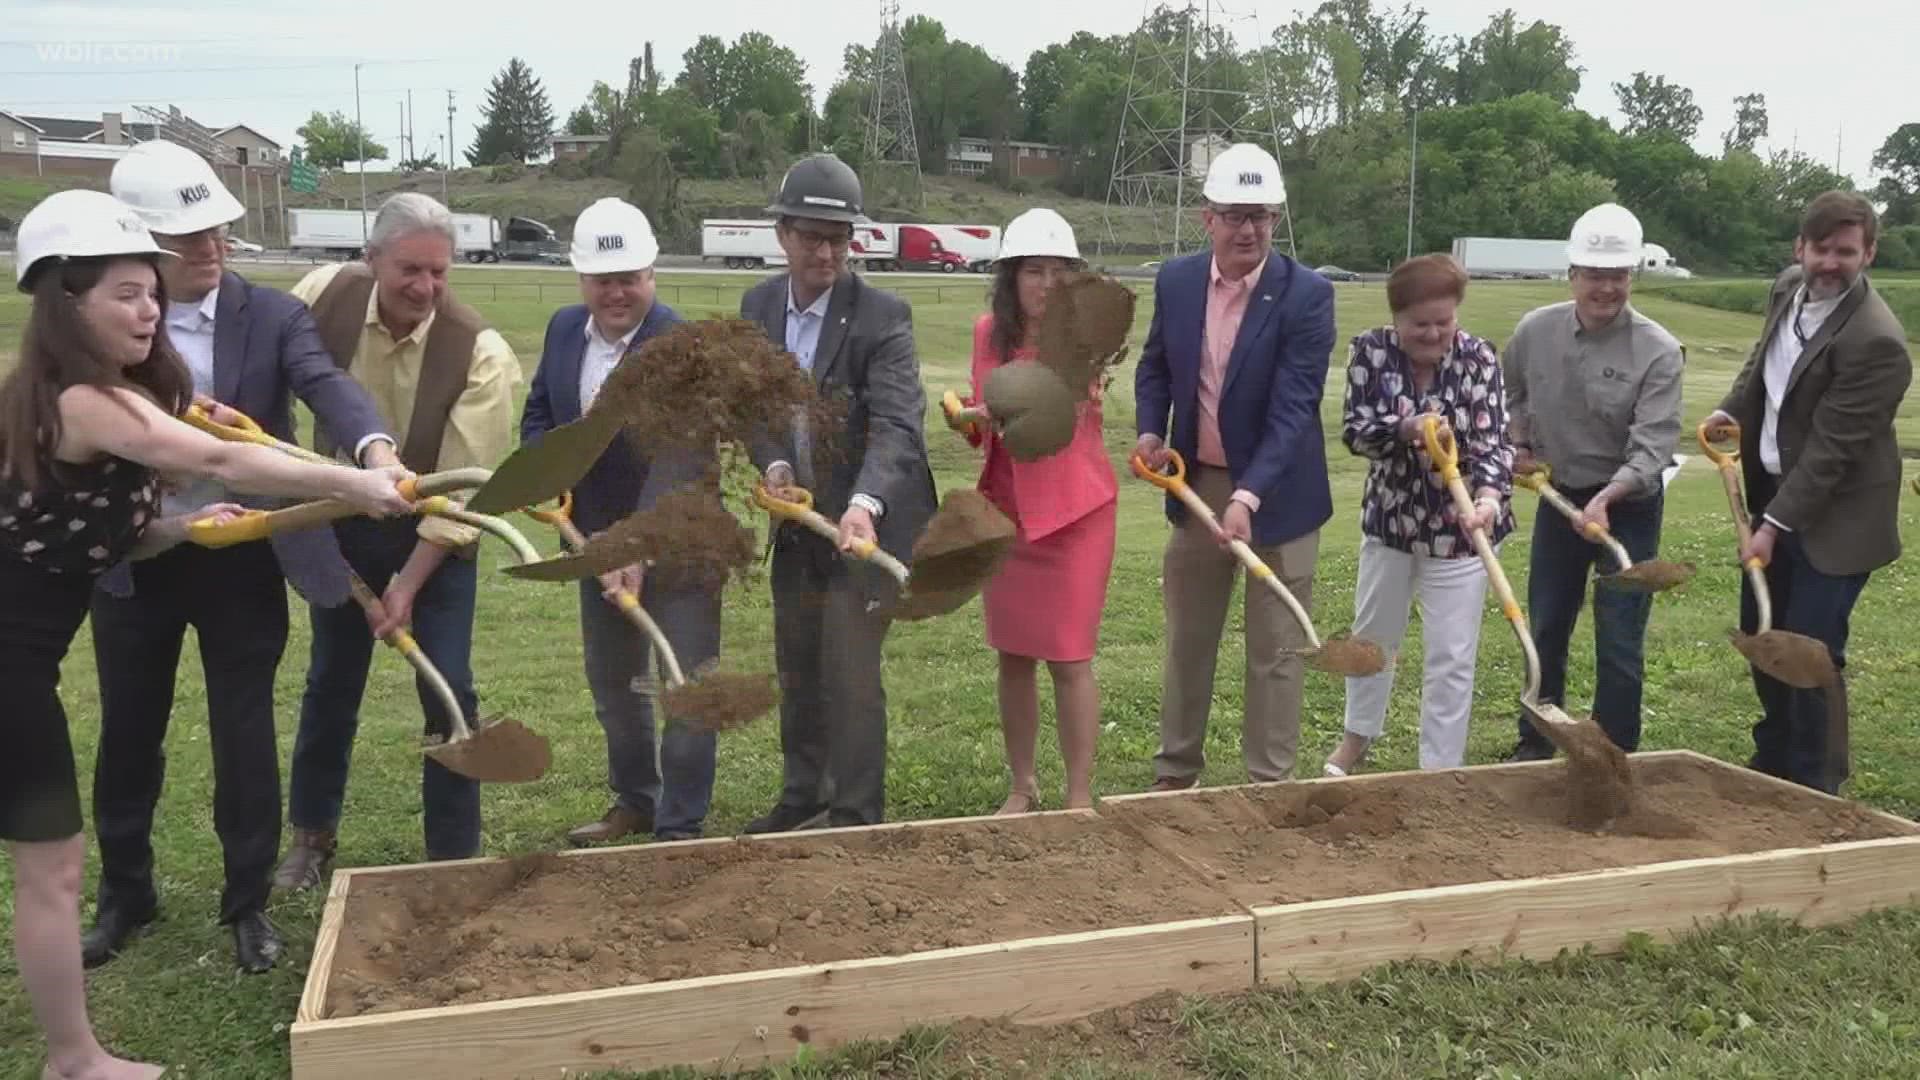 KUB broke ground on Knoxville's first community solar array. It will provide customers a chance to use solar power without having to install solar panels.